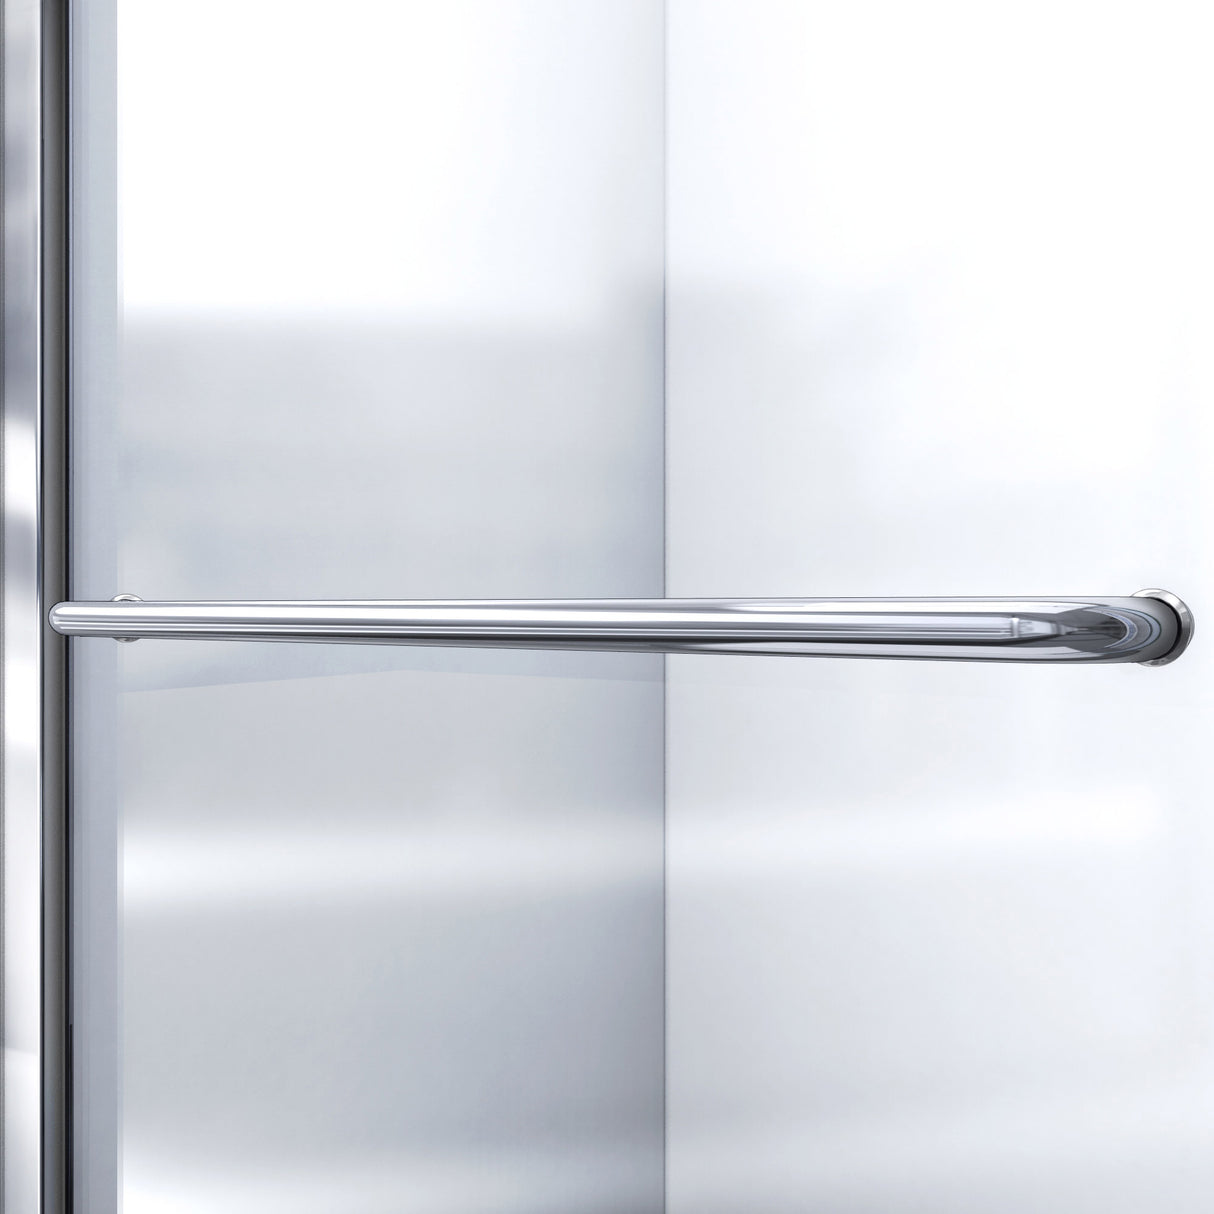 DreamLine Infinity-Z 34 in. D x 60 in. W x 74 3/4 in. H Frosted Sliding Shower Door in Chrome and Left Drain Black Base